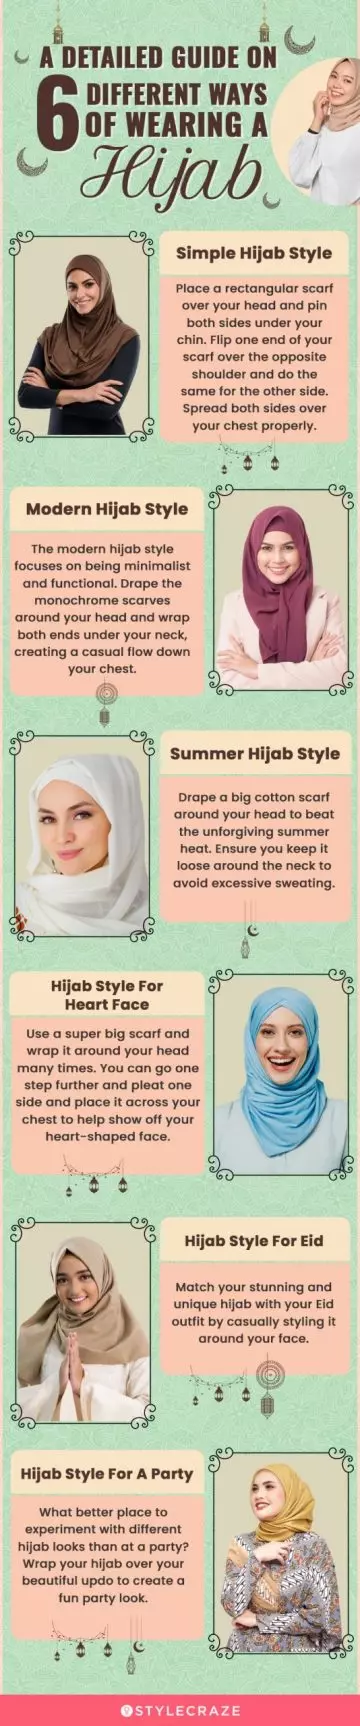 a detailed guide on 6 different ways of wearing a hijab (infographic)